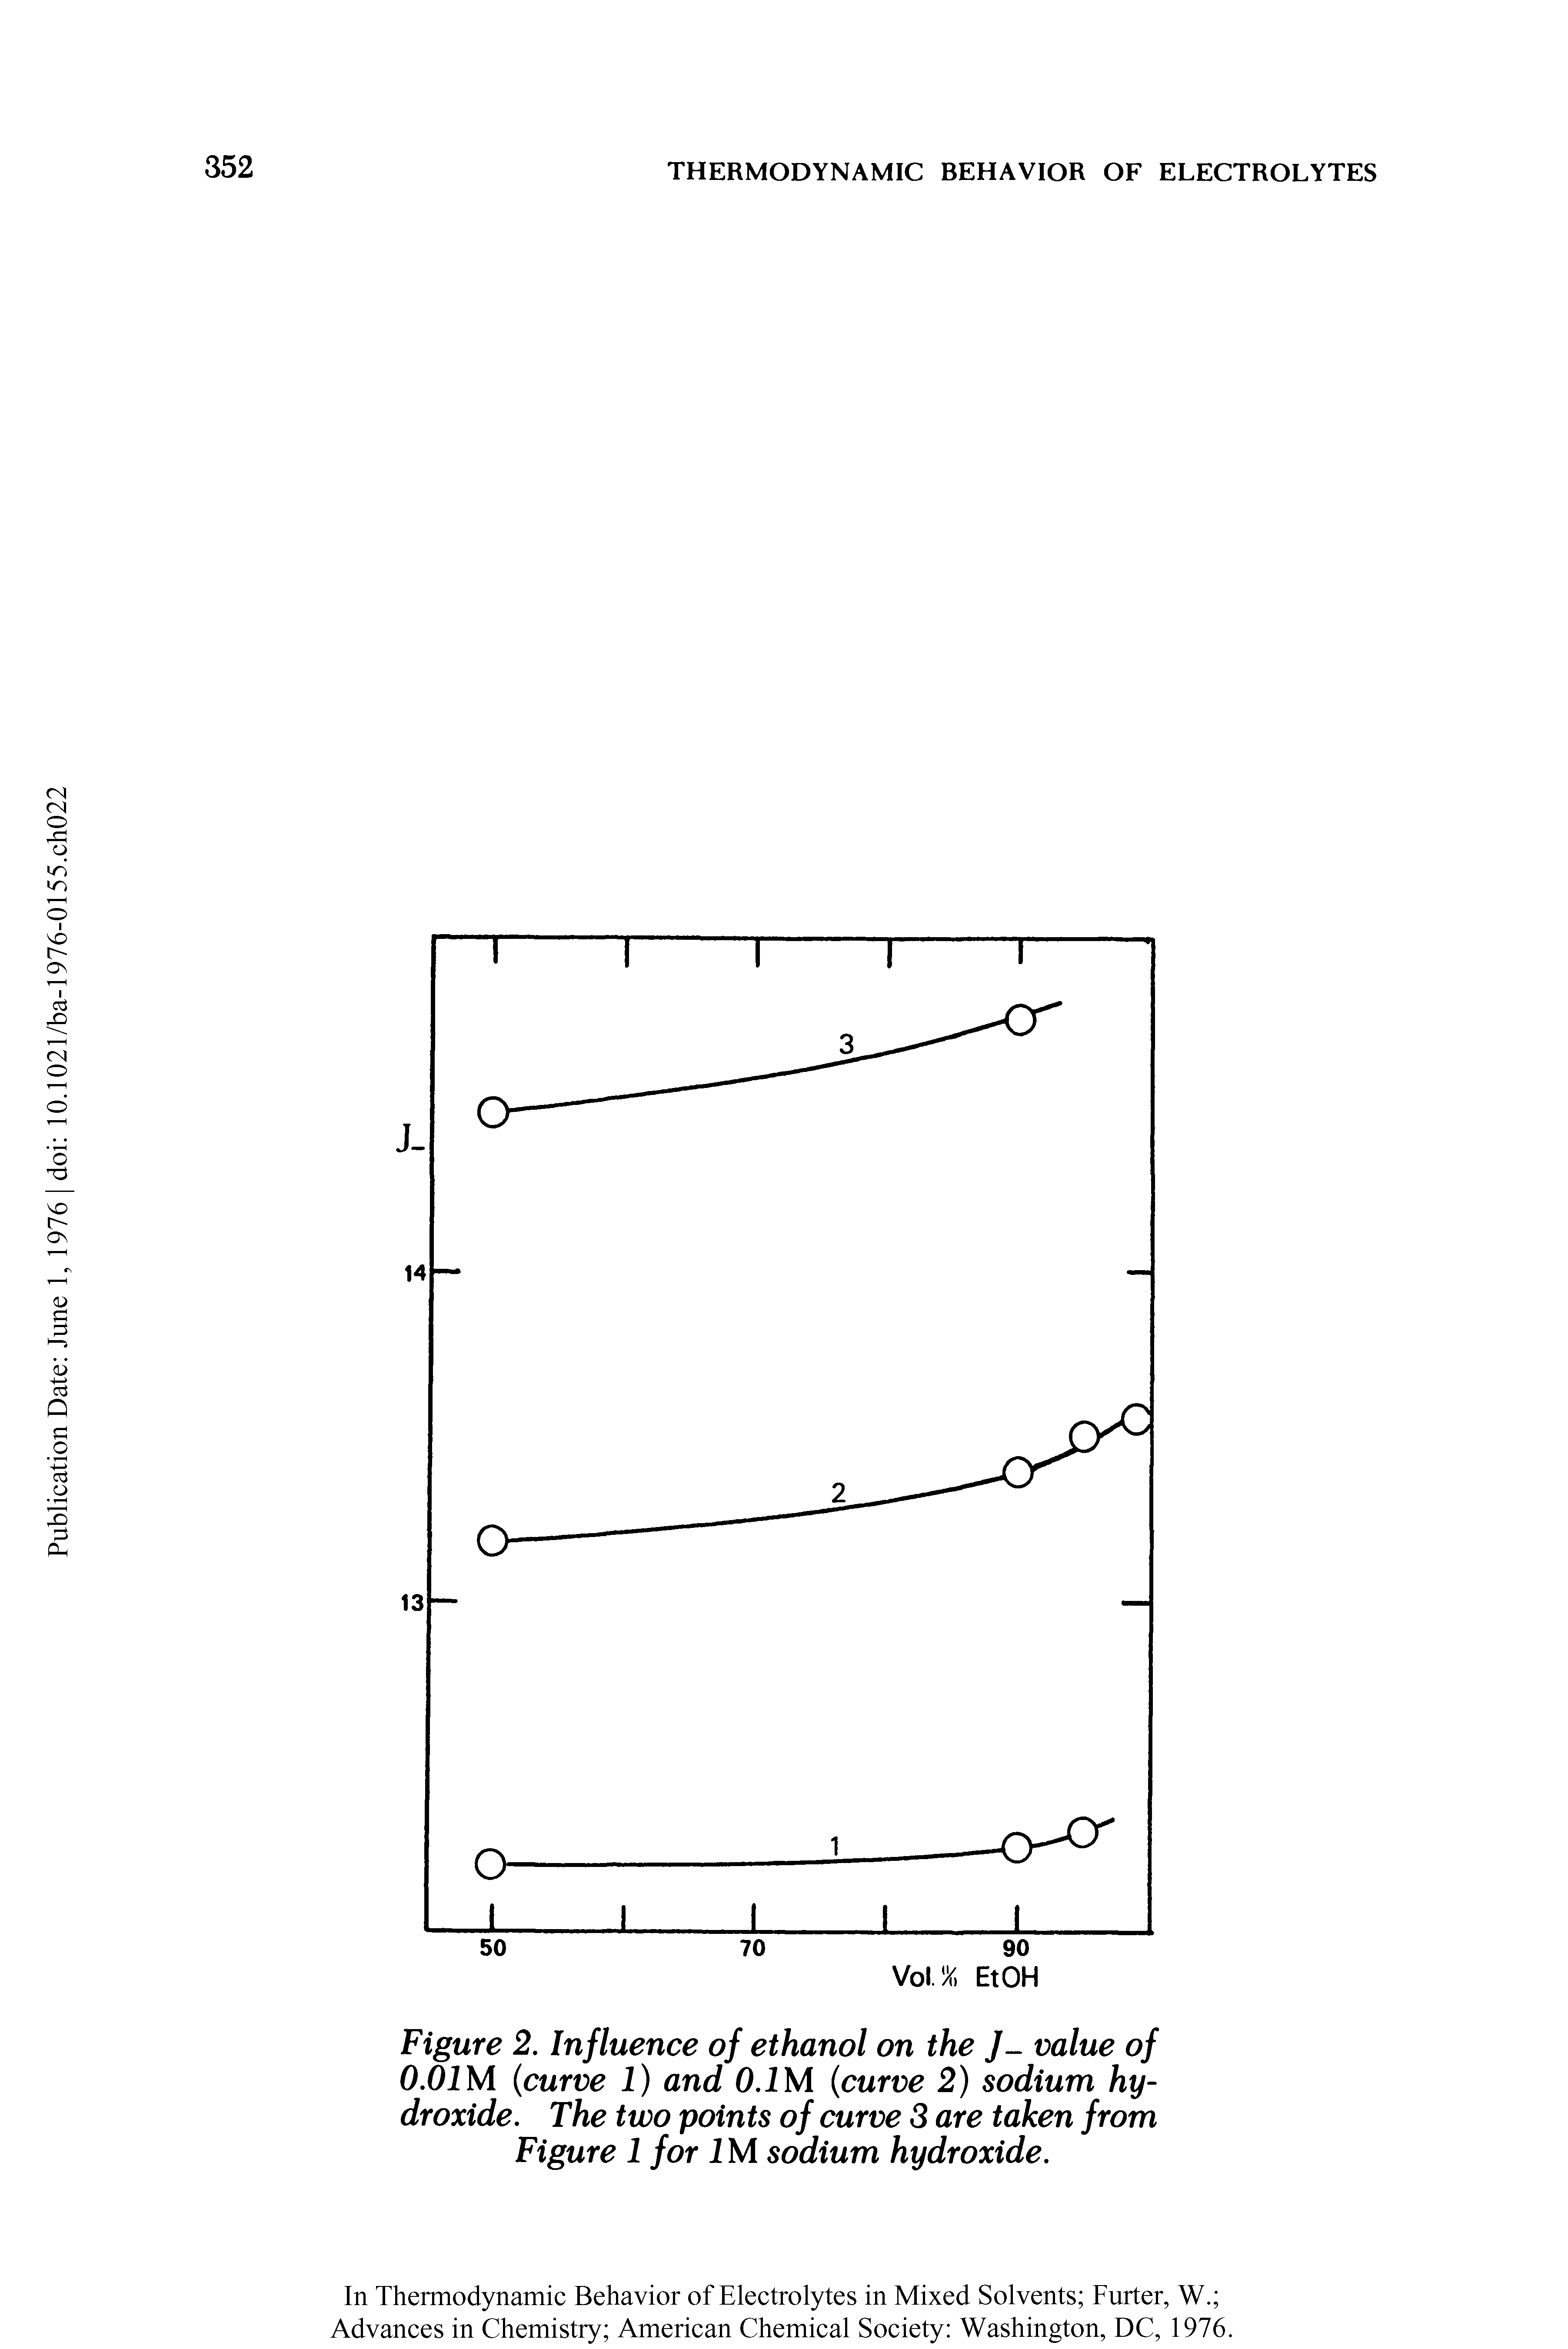 Figure 2. Influence of ethanol on the J- value of 0.01 M (curve 1) and 0.1 M (curve 2) sodium hydroxide. The two points of curve 3 are taken from Figure 1 for 1M sodium hydroxide.